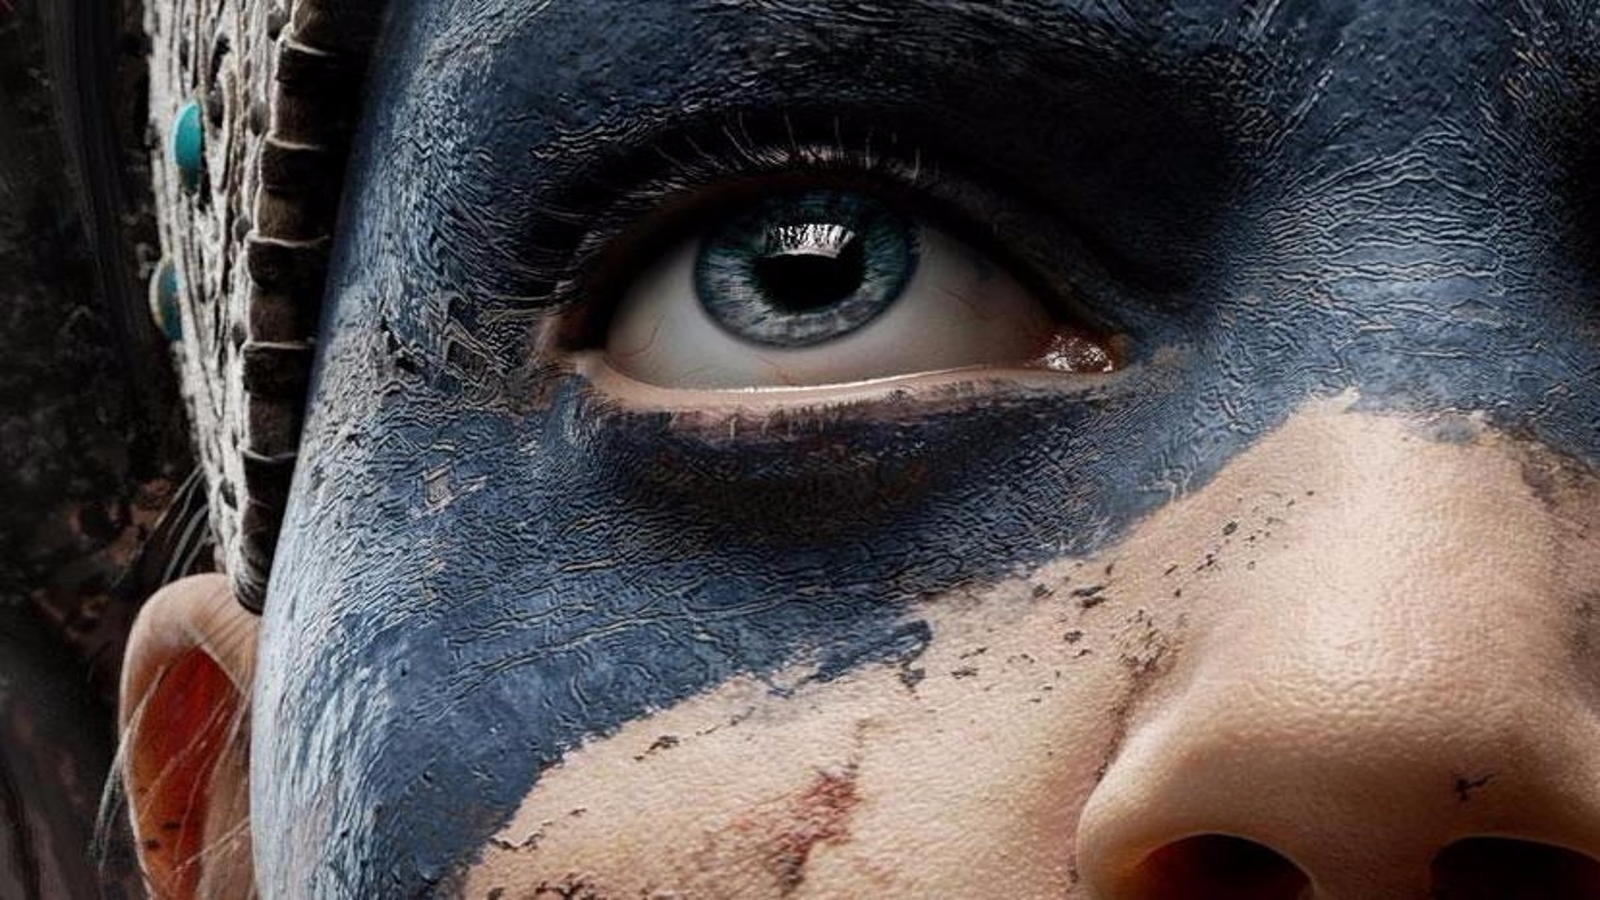 Senua's Saga: Hellblade 2 appears to still be in early phases of  development